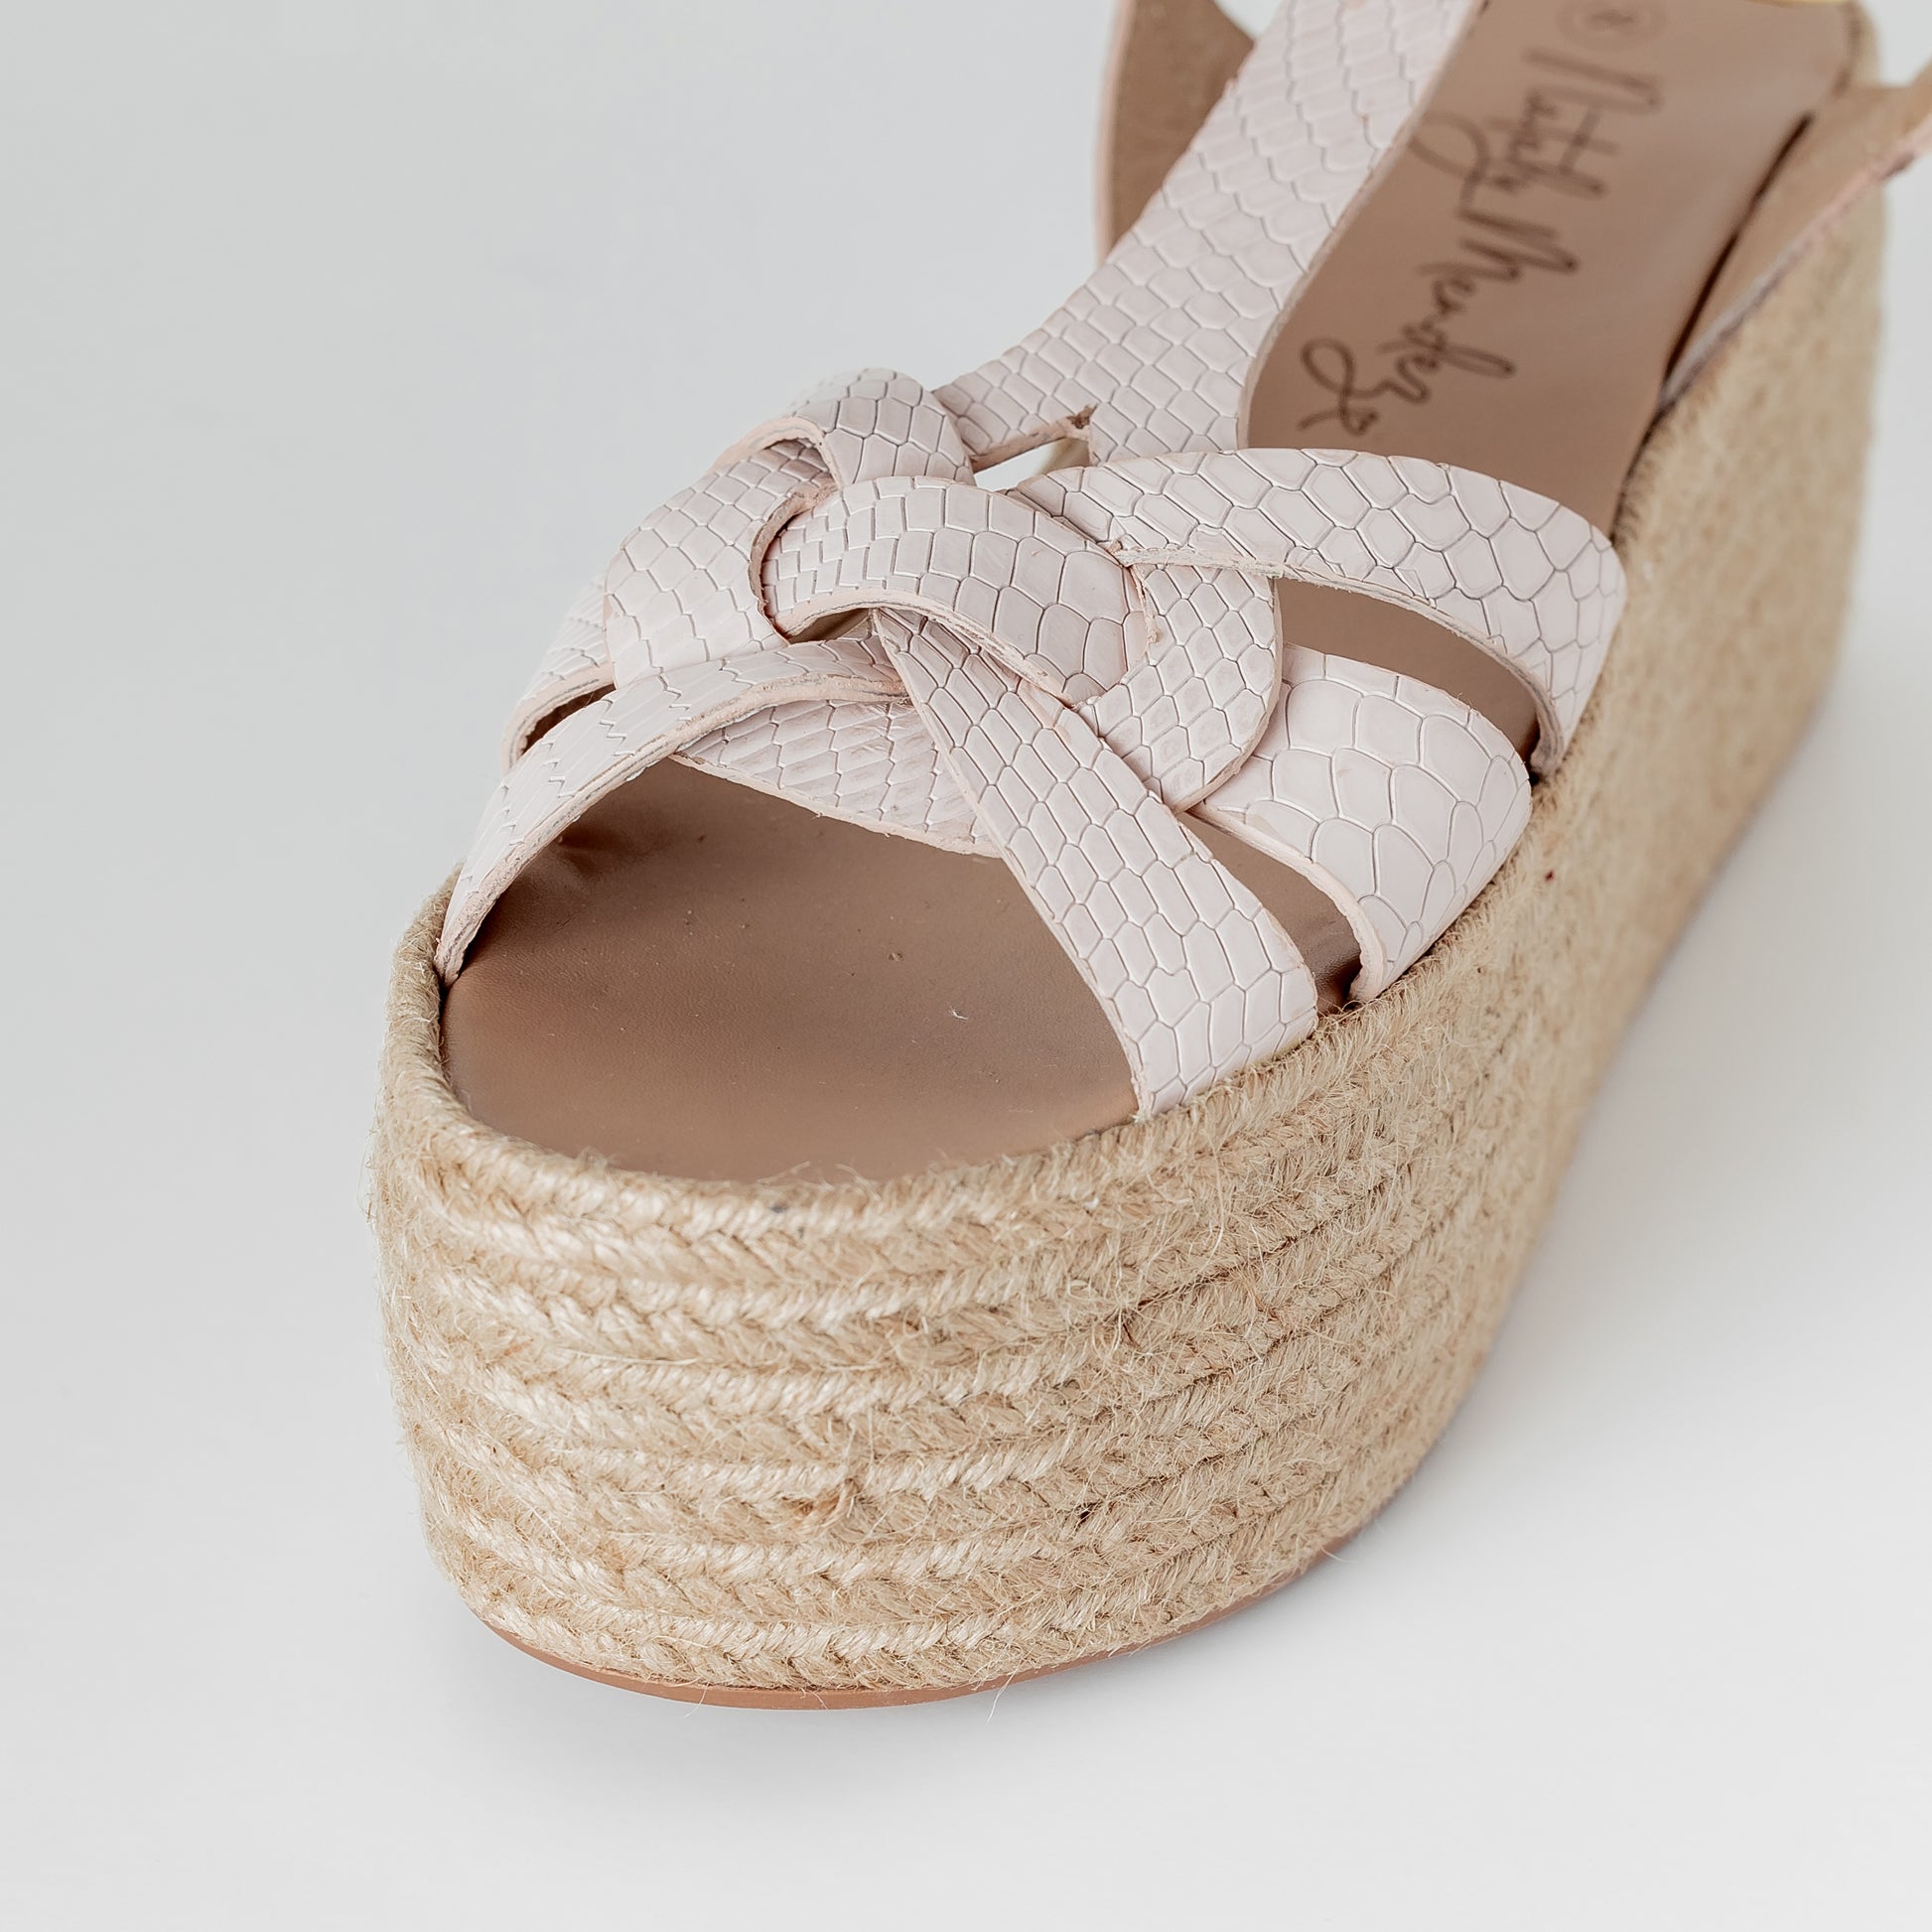 Get ready to rock your new CAMERON ESPADRILLES, just by adding a few inches and looking amazing and chic for your day! FEATURES Its base is lined in natural jute Genuine Leather on the upper and back Insole made of genuine leather. Handmade 3 inch heel weight 2.5 inch platform